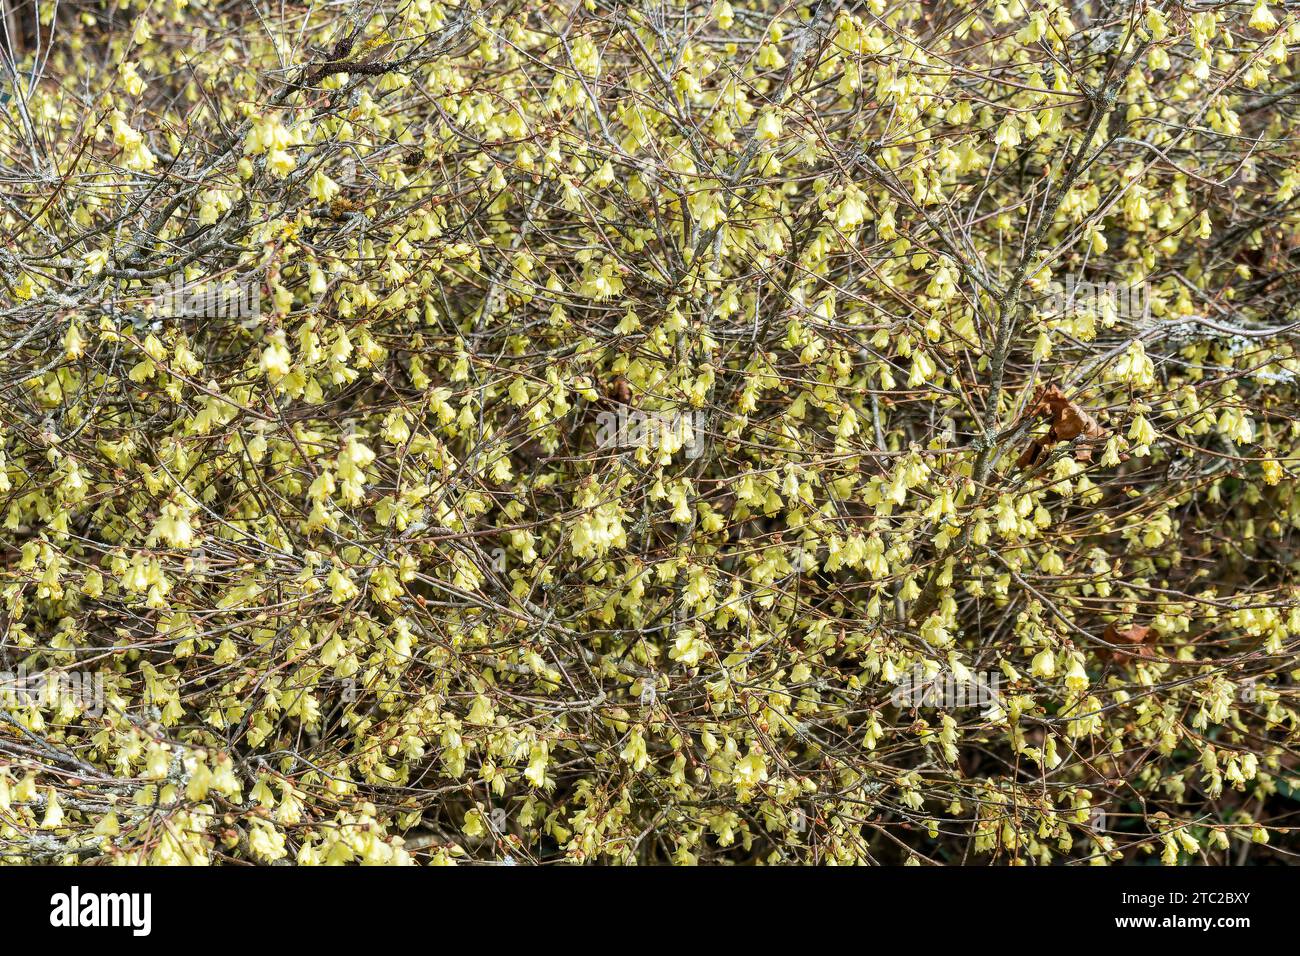 Corylopsis pauciflora an early spring flowering shrub plant with a primrose yellow springtime flower commonly known as winter hazel, stock photo image Stock Photo